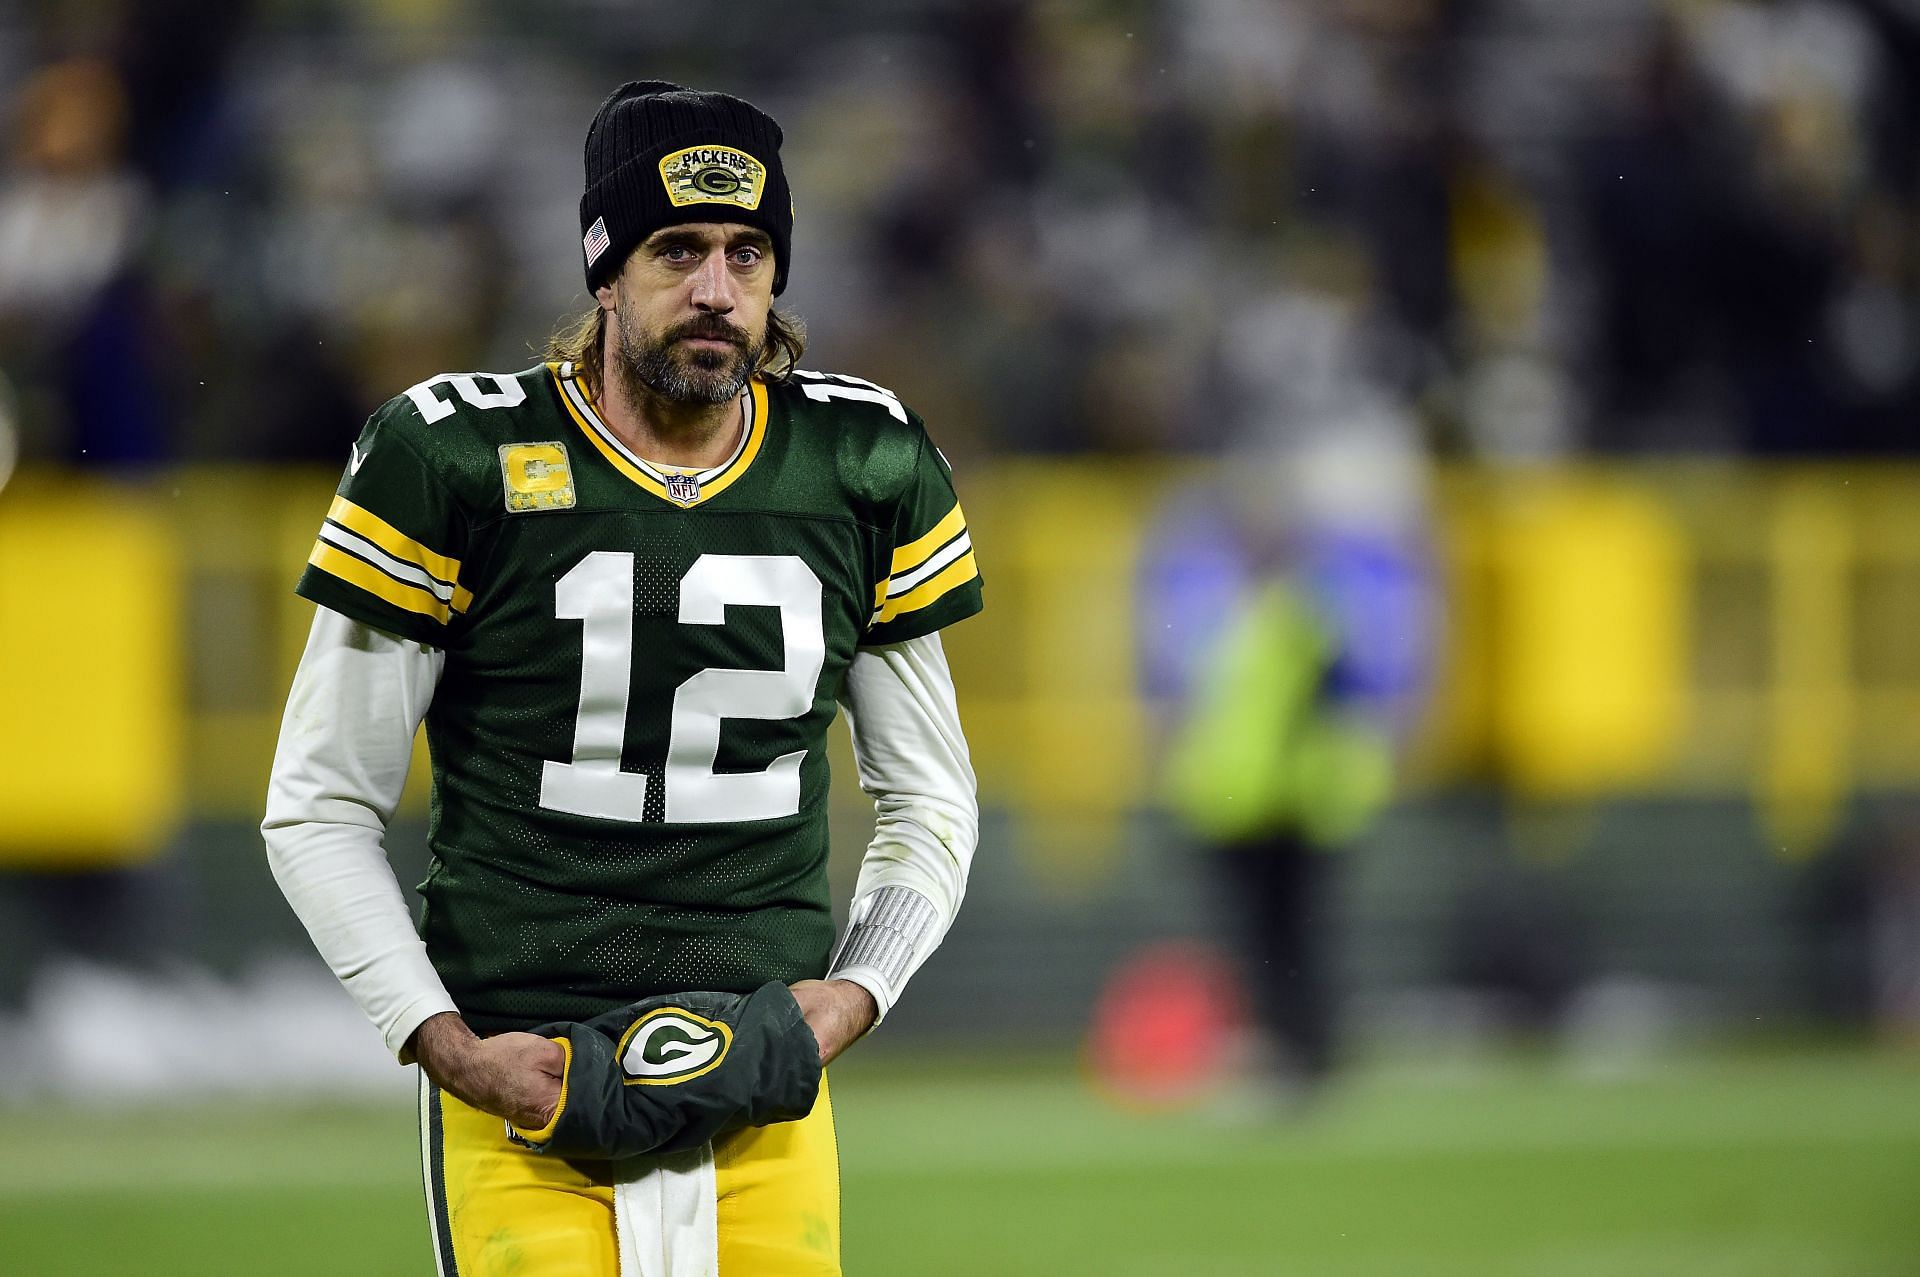 &quot;The Conners&quot; TV show took a dig at QB Aaron Rodgers this week